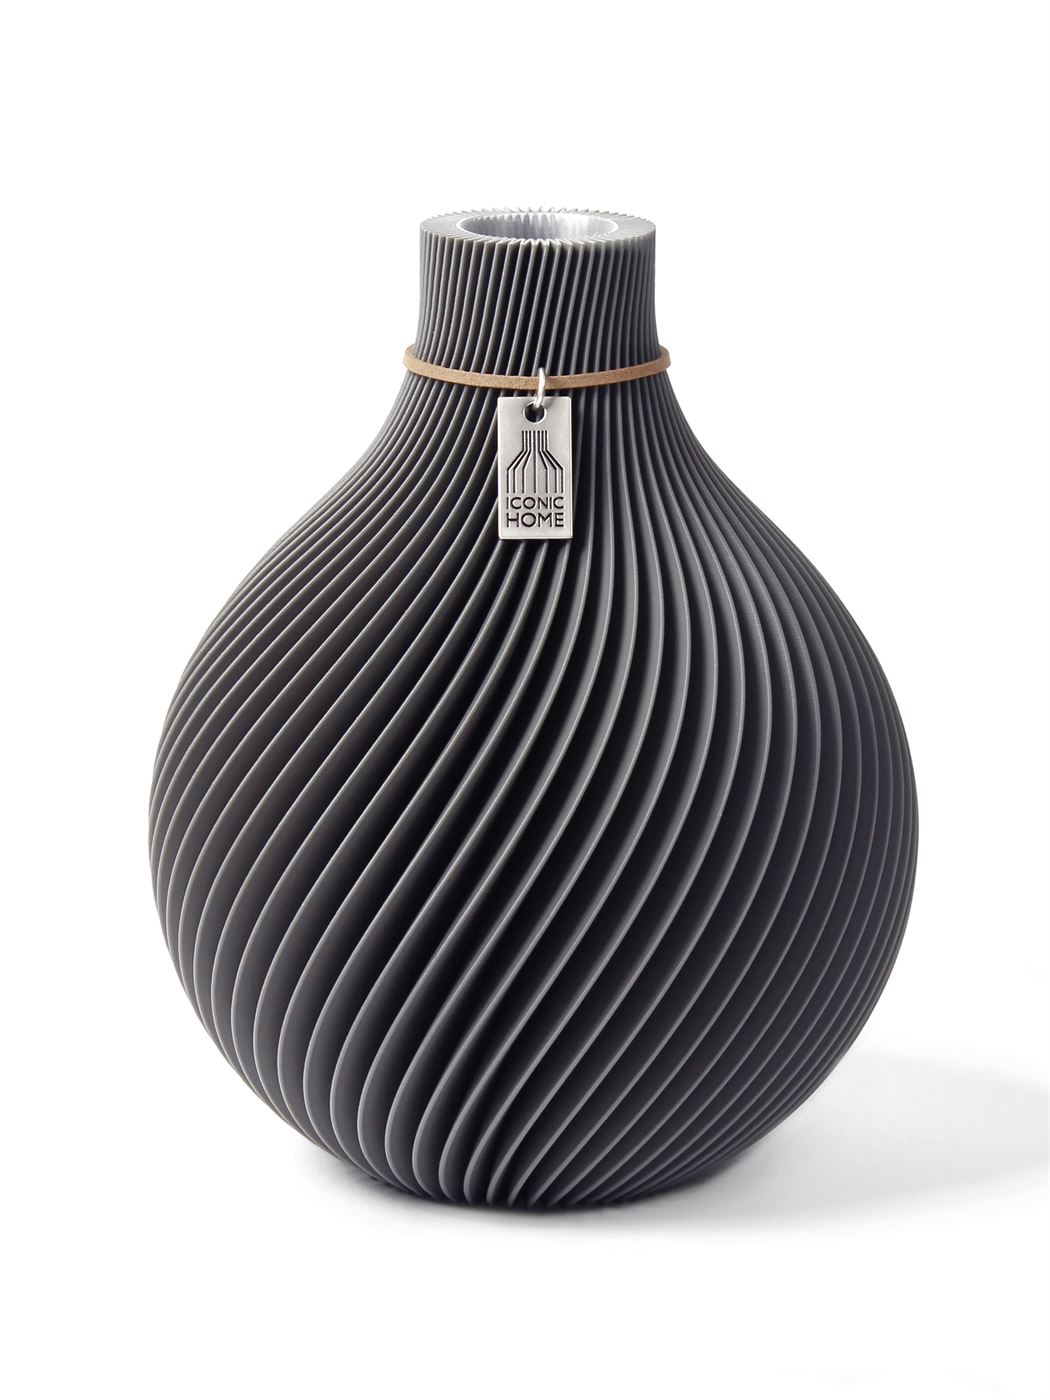 Vase Sphere Shadow Grey Small ICONIC HOME